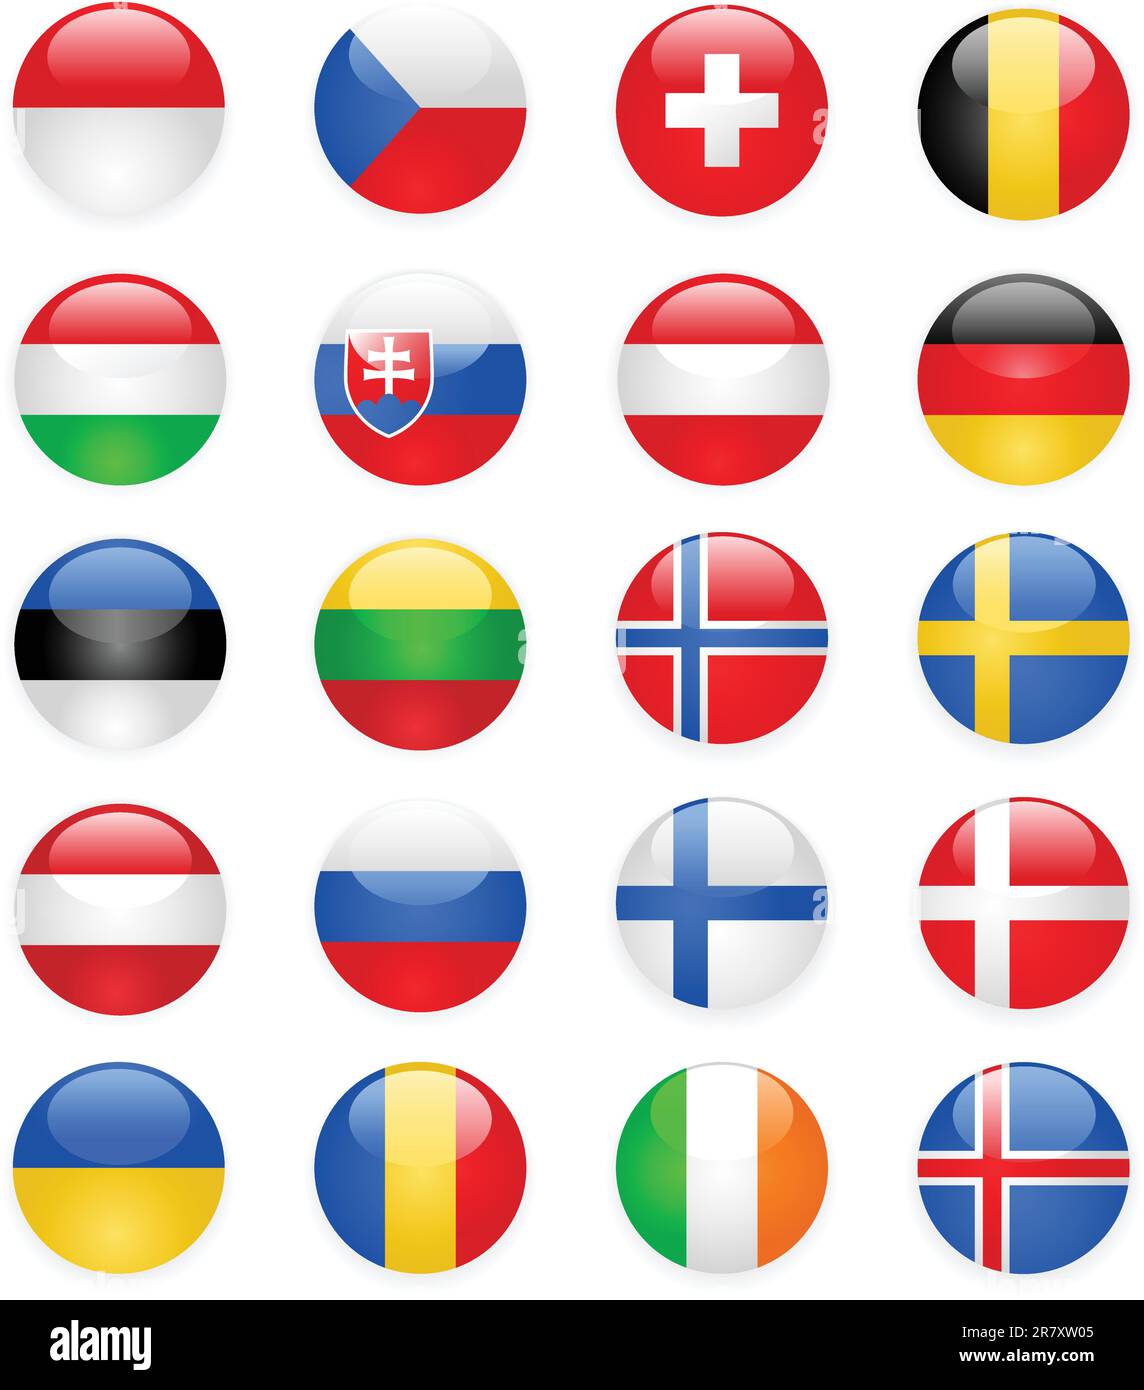 1,248 All Official Flags Country Shape Images, Stock Photos, 3D objects, &  Vectors